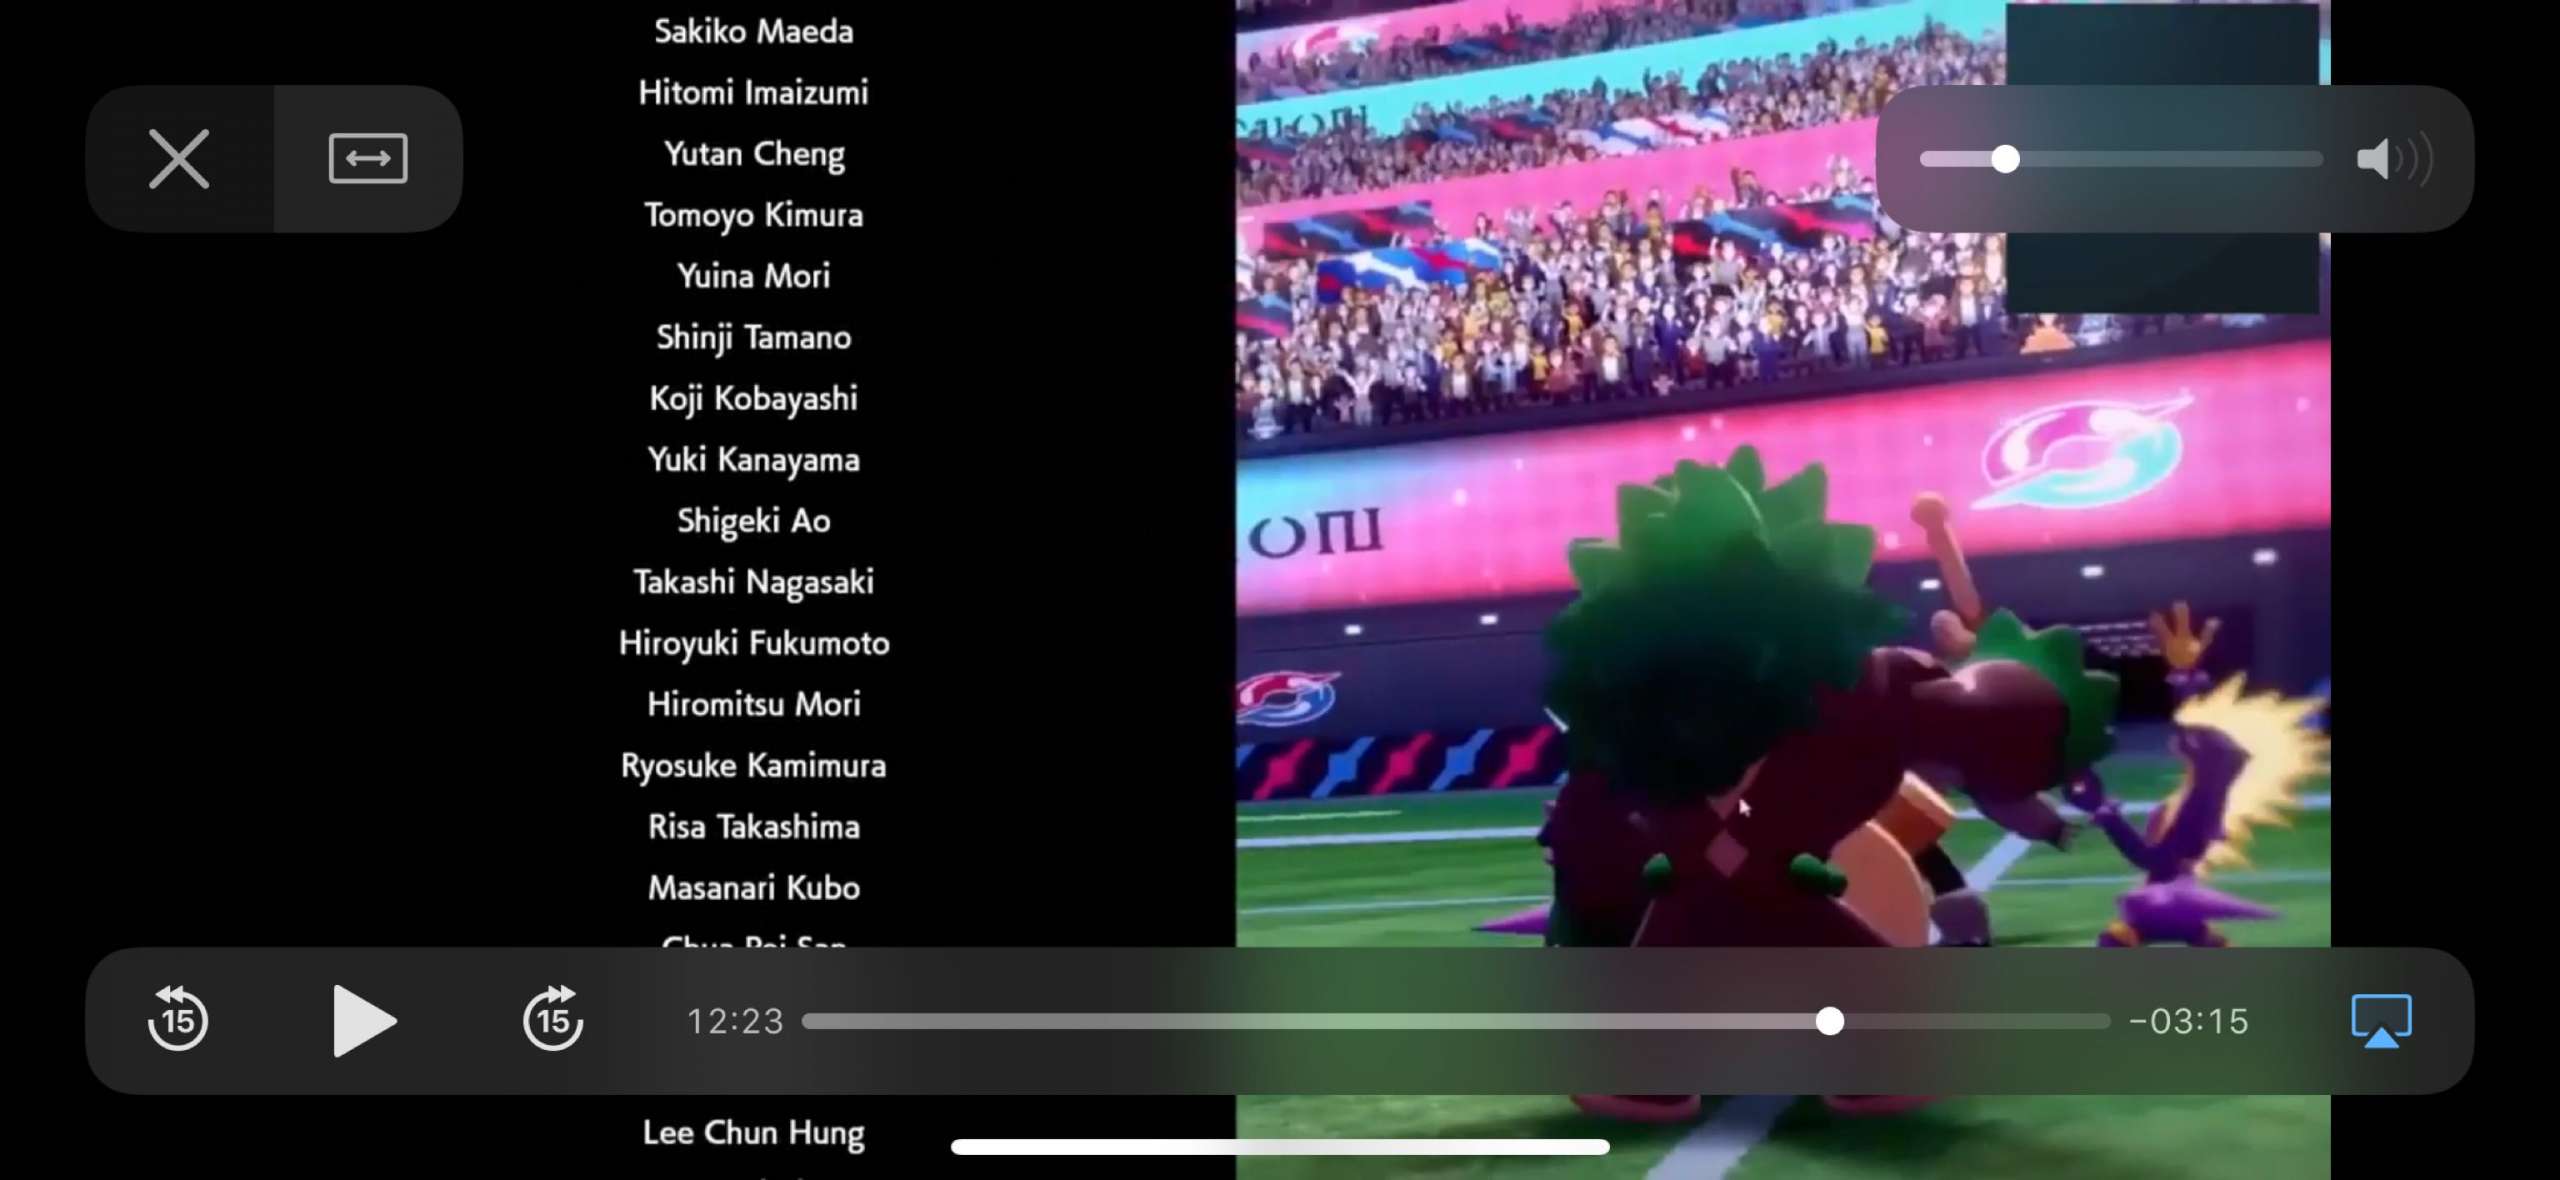 A Mouse Cursor Glitch Appears In Pokemon Sword And Shield, Raising Further Questions About The Game’s Polish